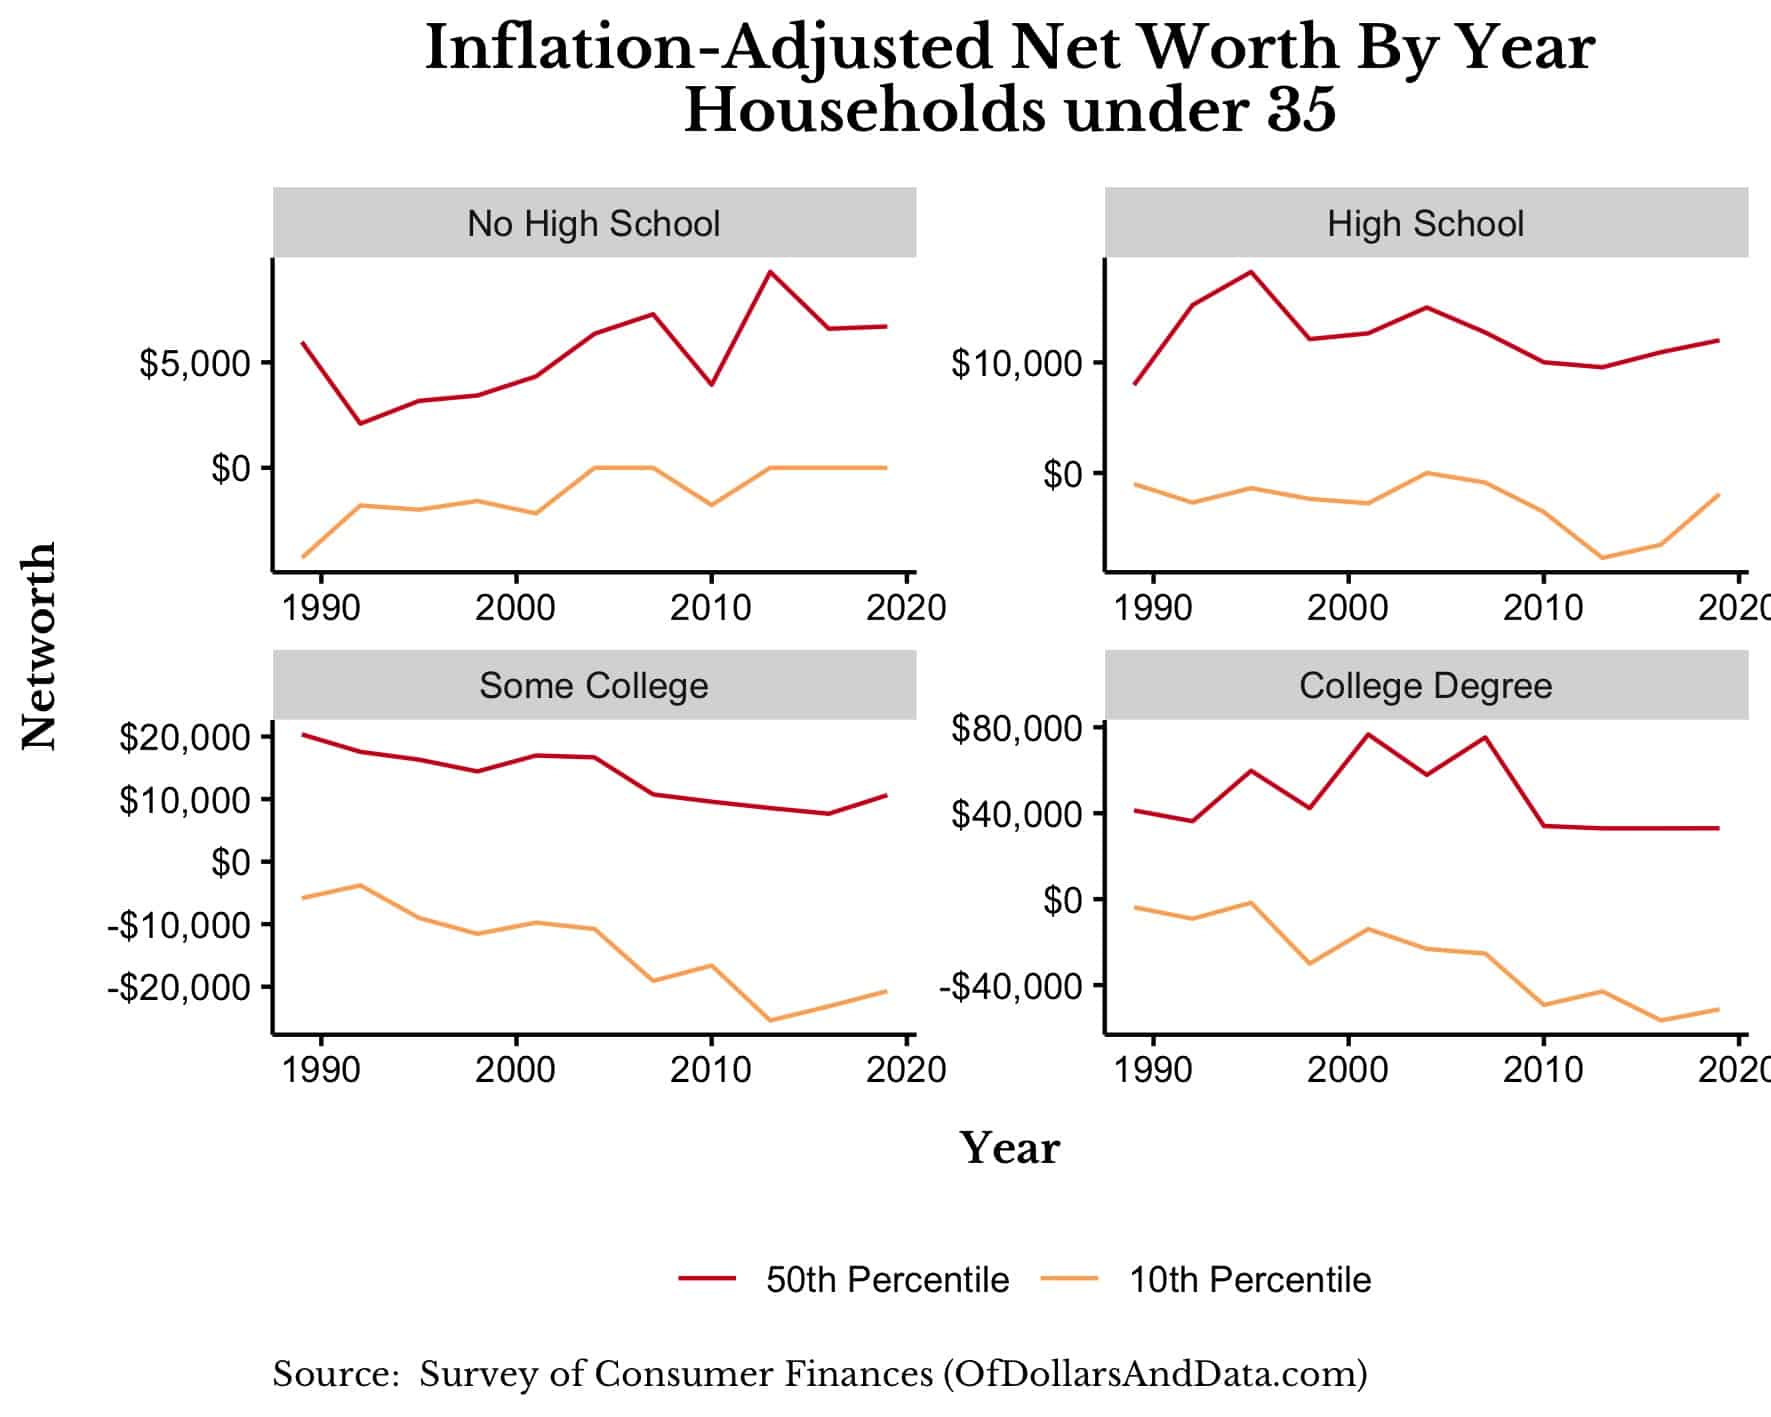 Inflation-adjusted net worth by year for households under 35 broken out by education level